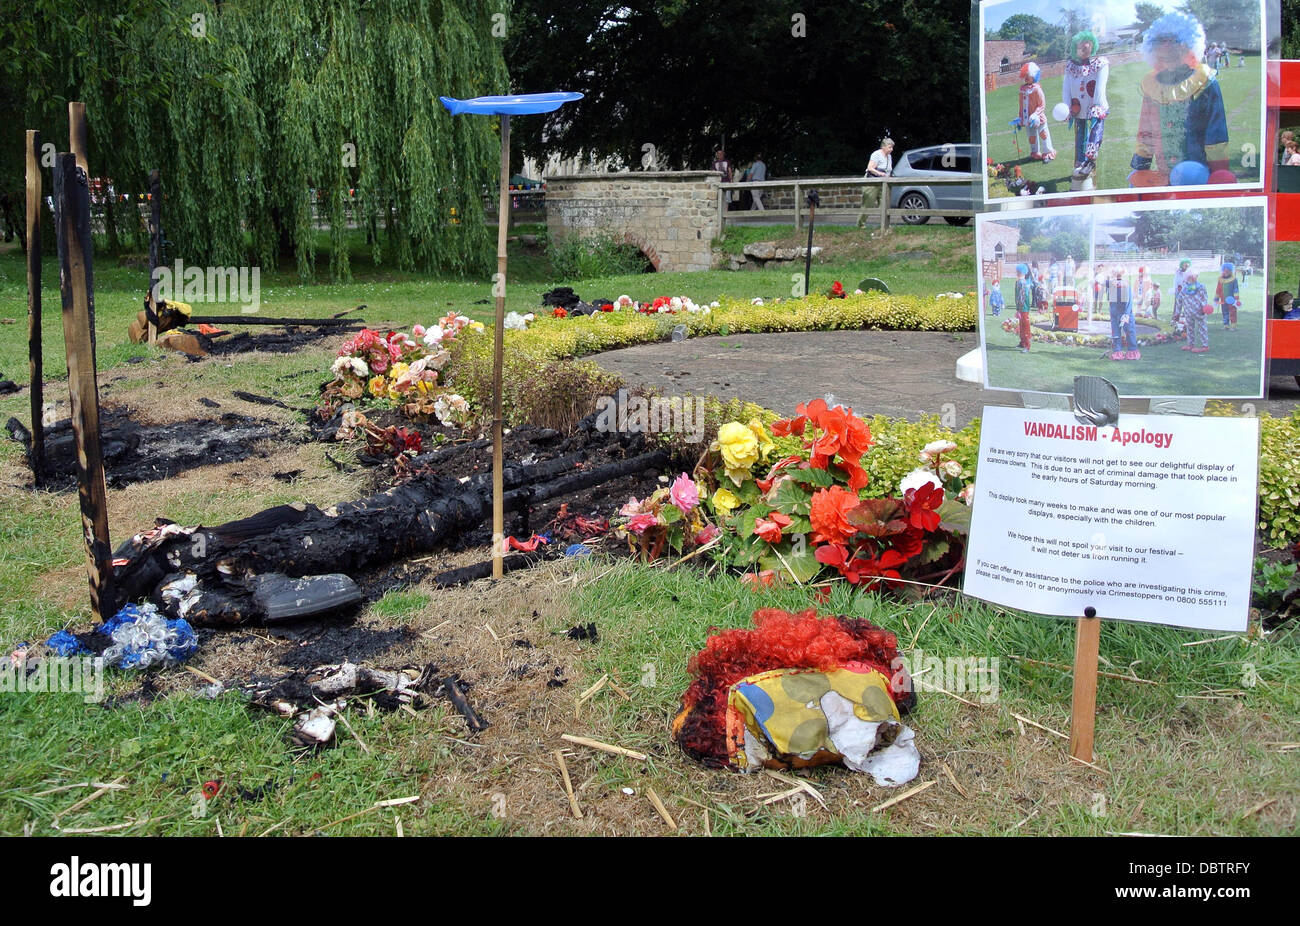 VANDALS SET FIRE TO & DESTROY MUSTON SCARECROW FESTIVAL MUSTON SCARBOROUGH NORTH YORKS SCARBOROUGH ENGLAND 04 August 2013 Stock Photo